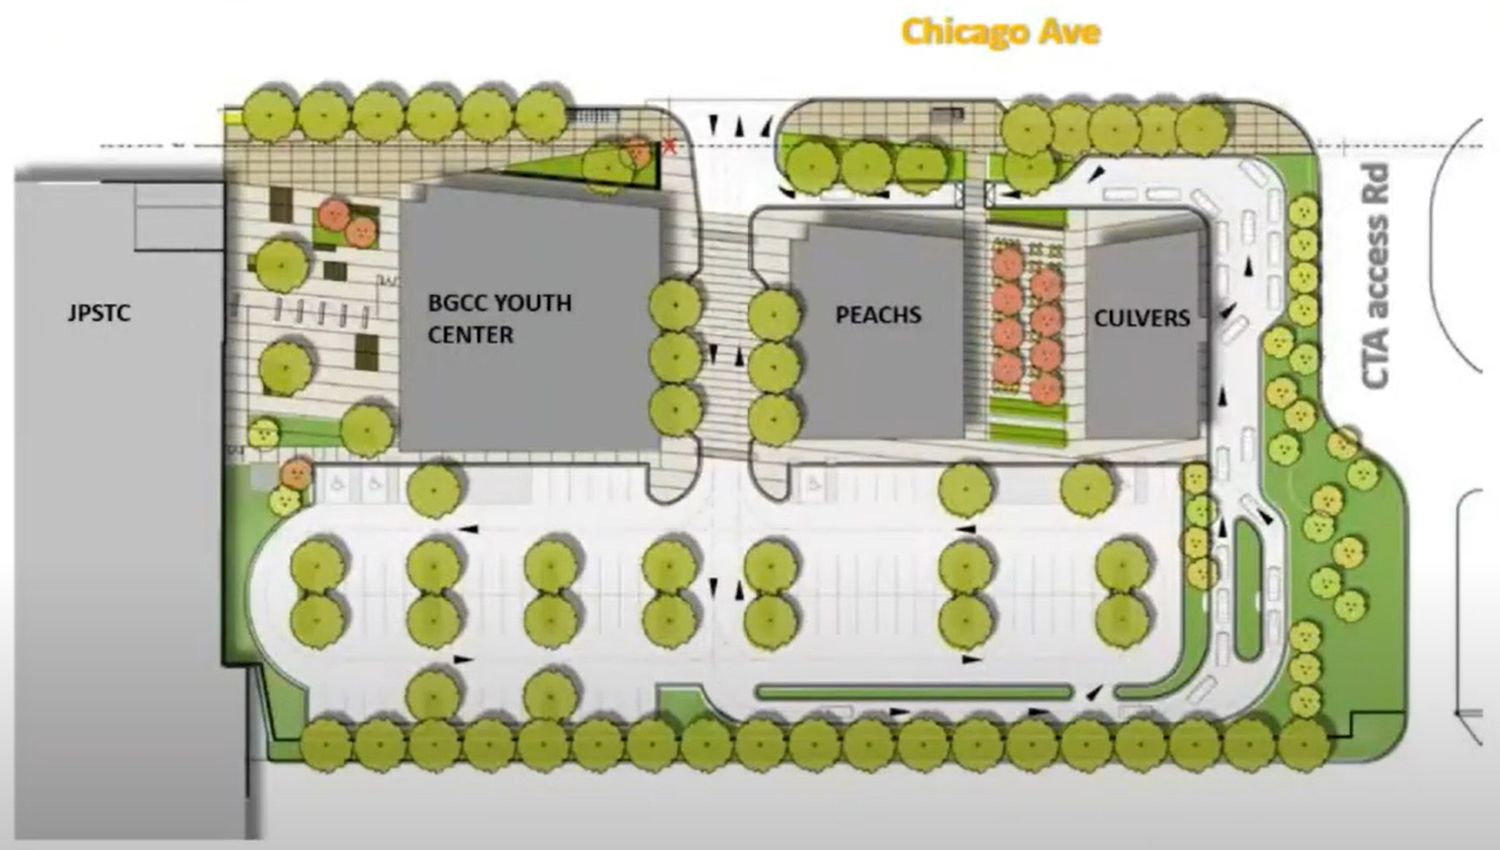 Site Plan of 4433 W Chicago Avenue. Image by Chicago DPD